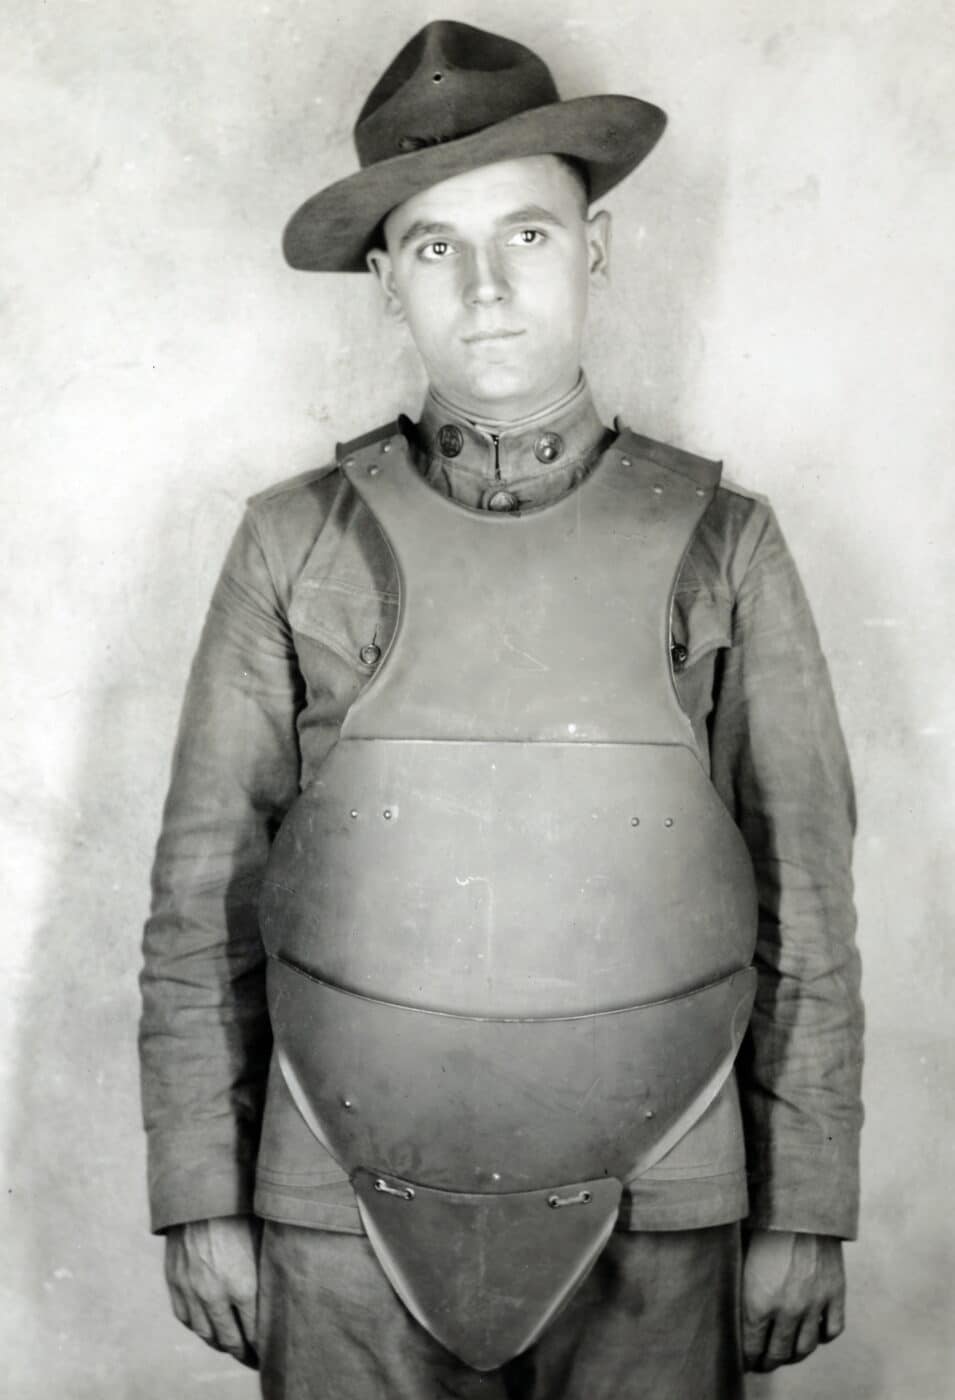 soldier wearing hale and kilburn body armor